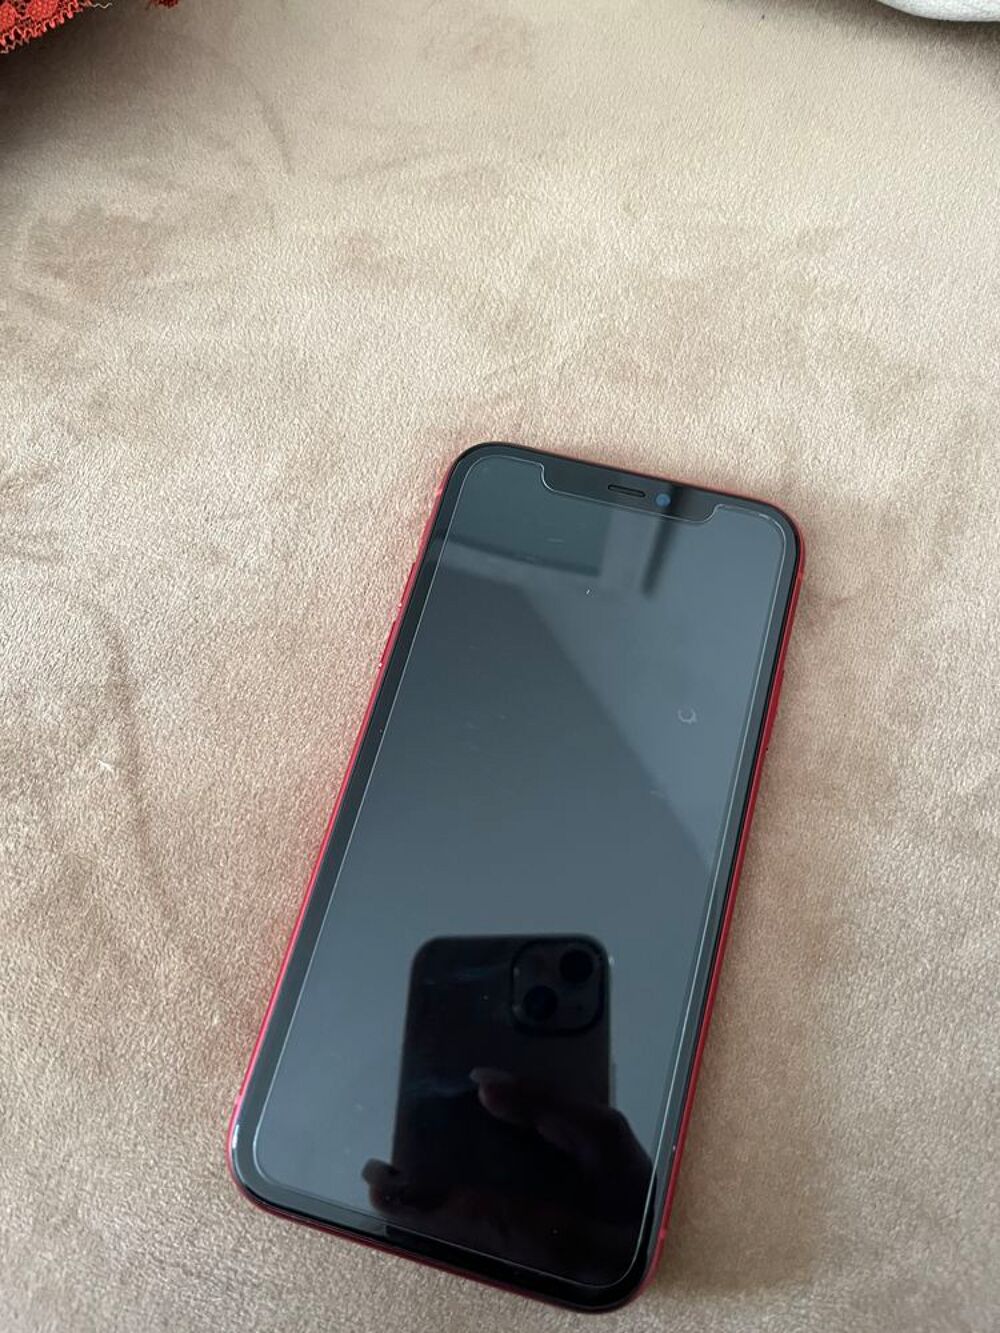 ! iPhone 11 red 128GB Tlphones et tablettes